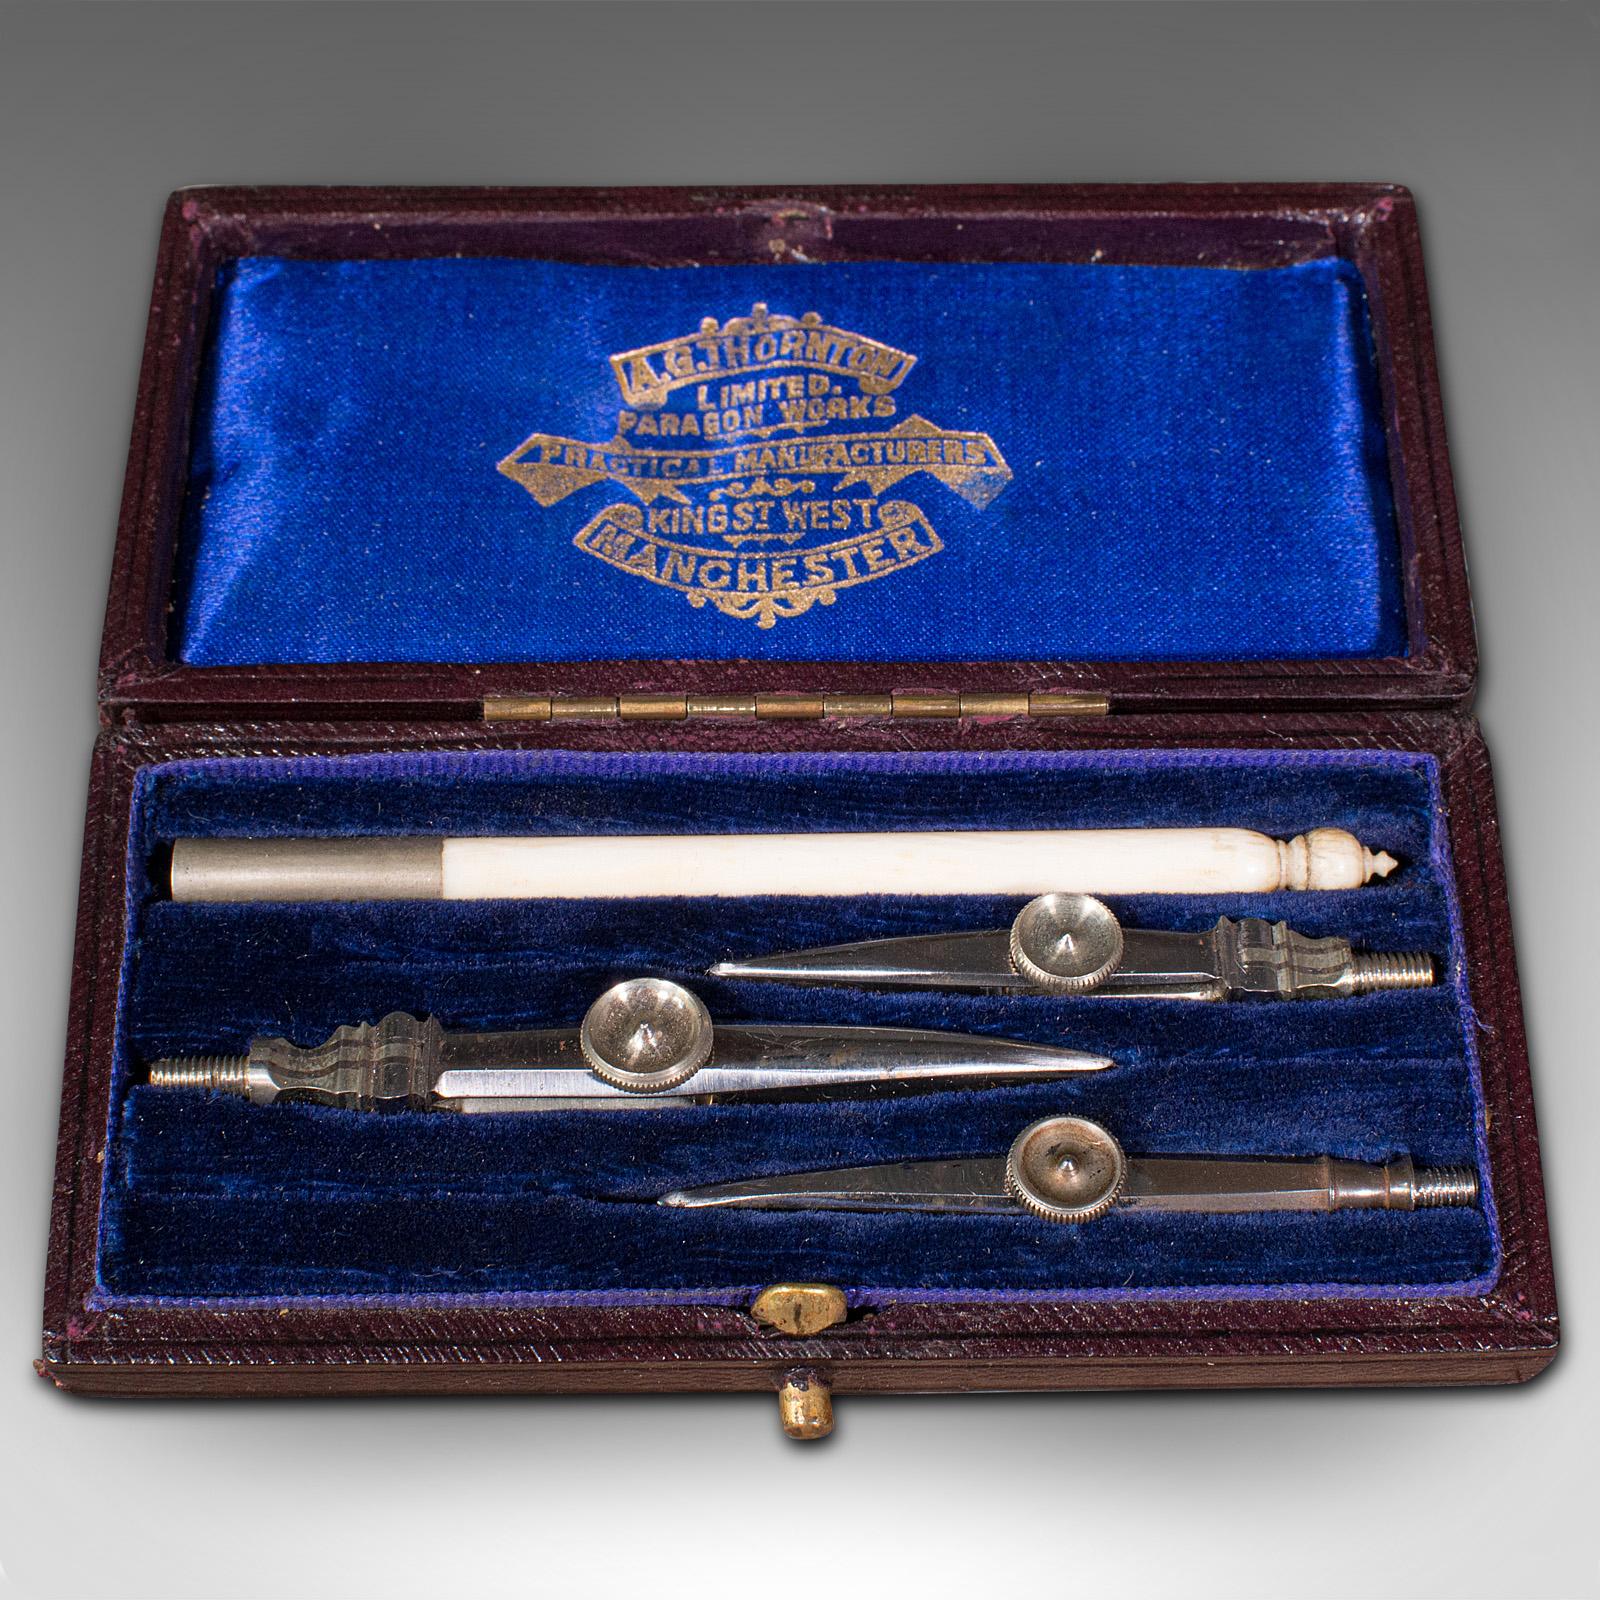 This is an antique draughtsman's pocket ruling pen set. An English, silver nickel architect's instrument case by A.G. Thornton of Manchester, dating to the early 20th century, circa 1920.

Appealingly portable ruling pen set
Displaying a